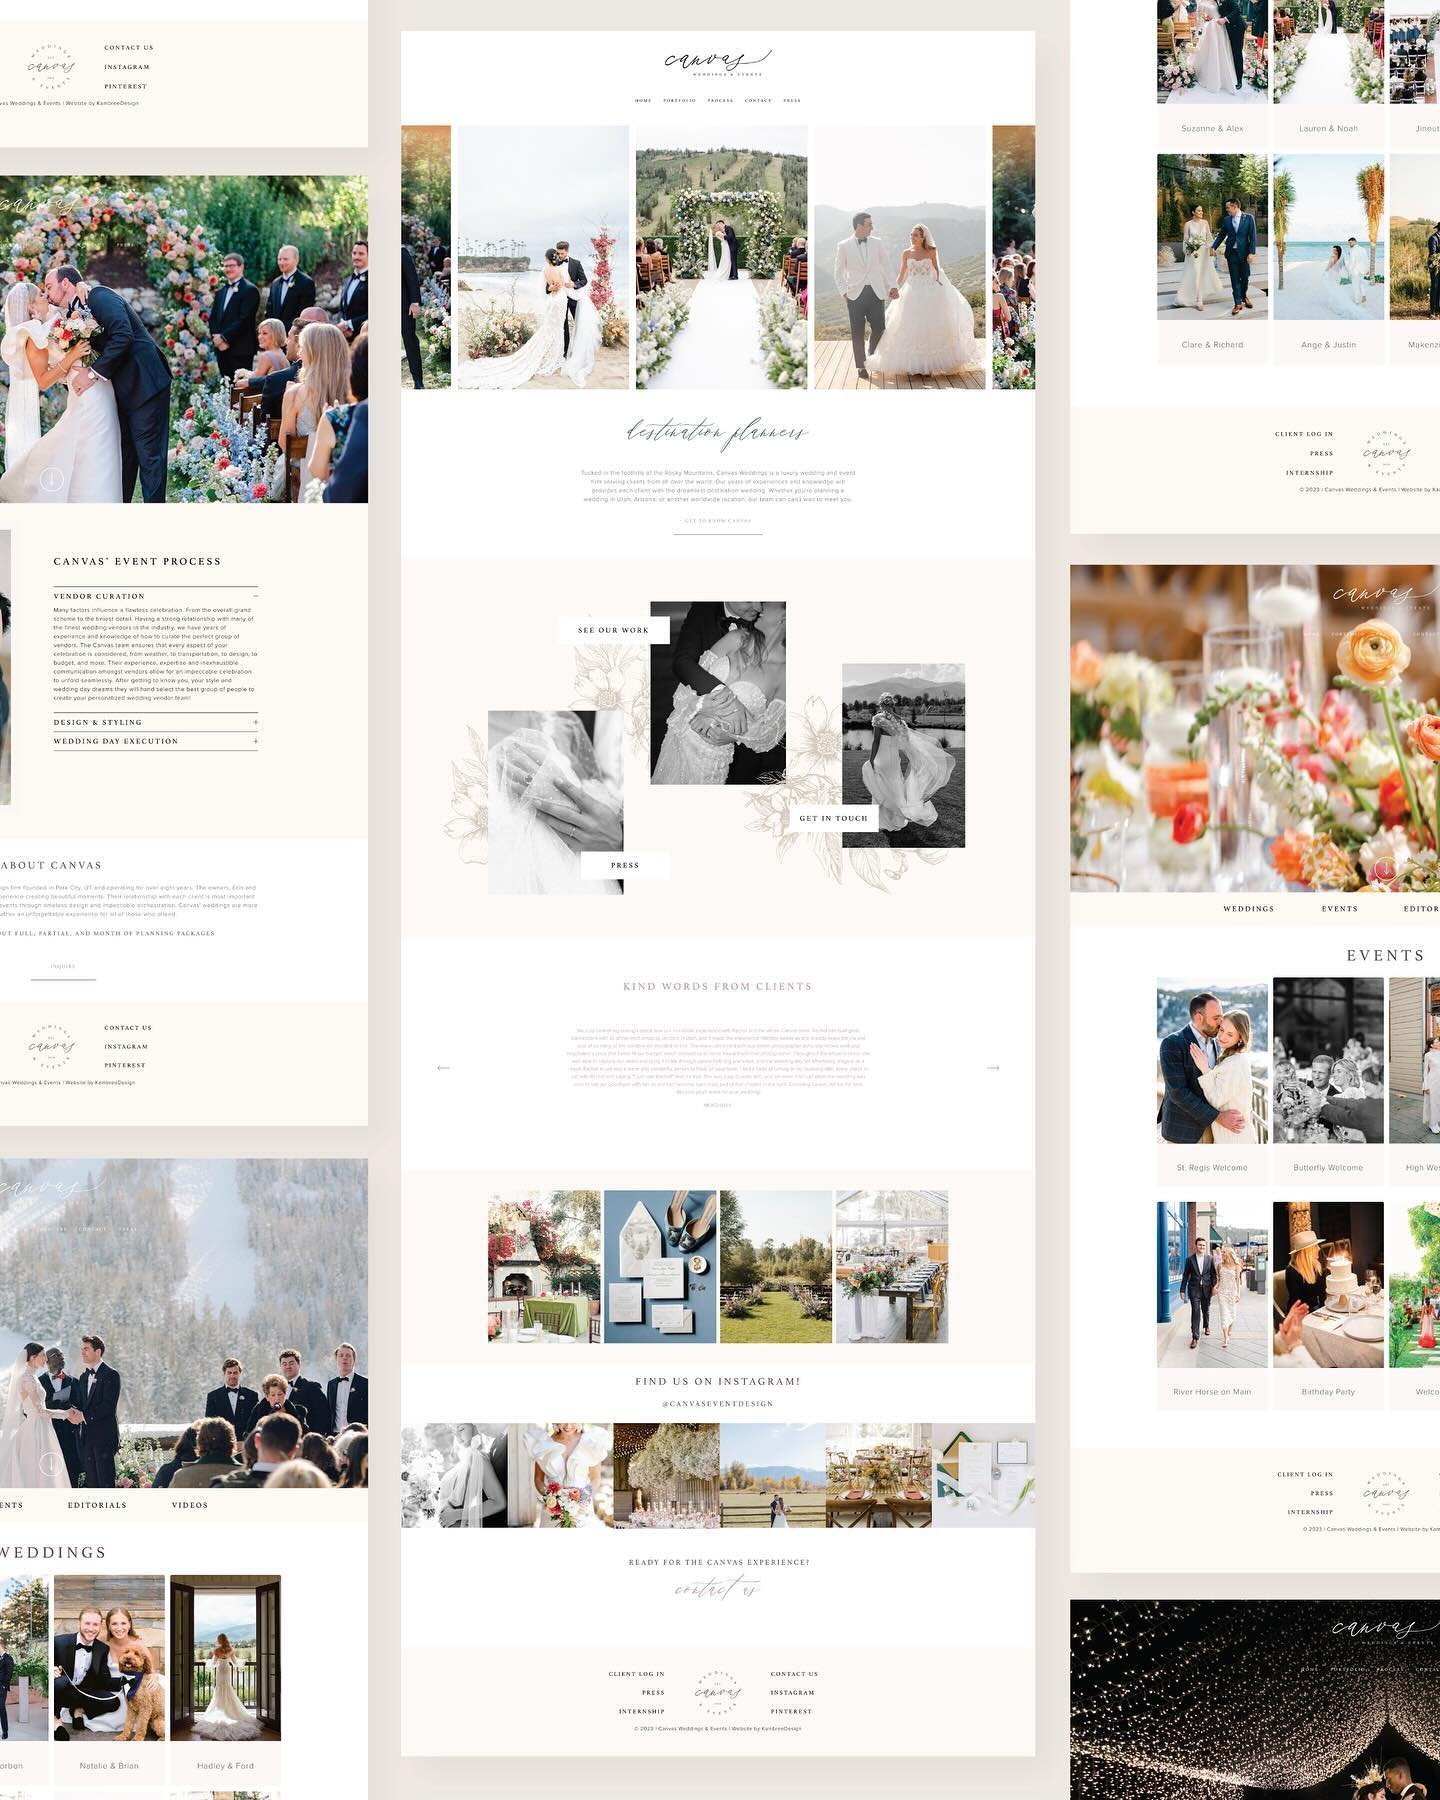 The prettiest wedding website got a little bit of TLC! 🕊️✨💍
I&rsquo;ve loved working with @canvaseventdesign over the last few years and was so excited to give their website a little update to better represent who they are. Swipe for the before &am